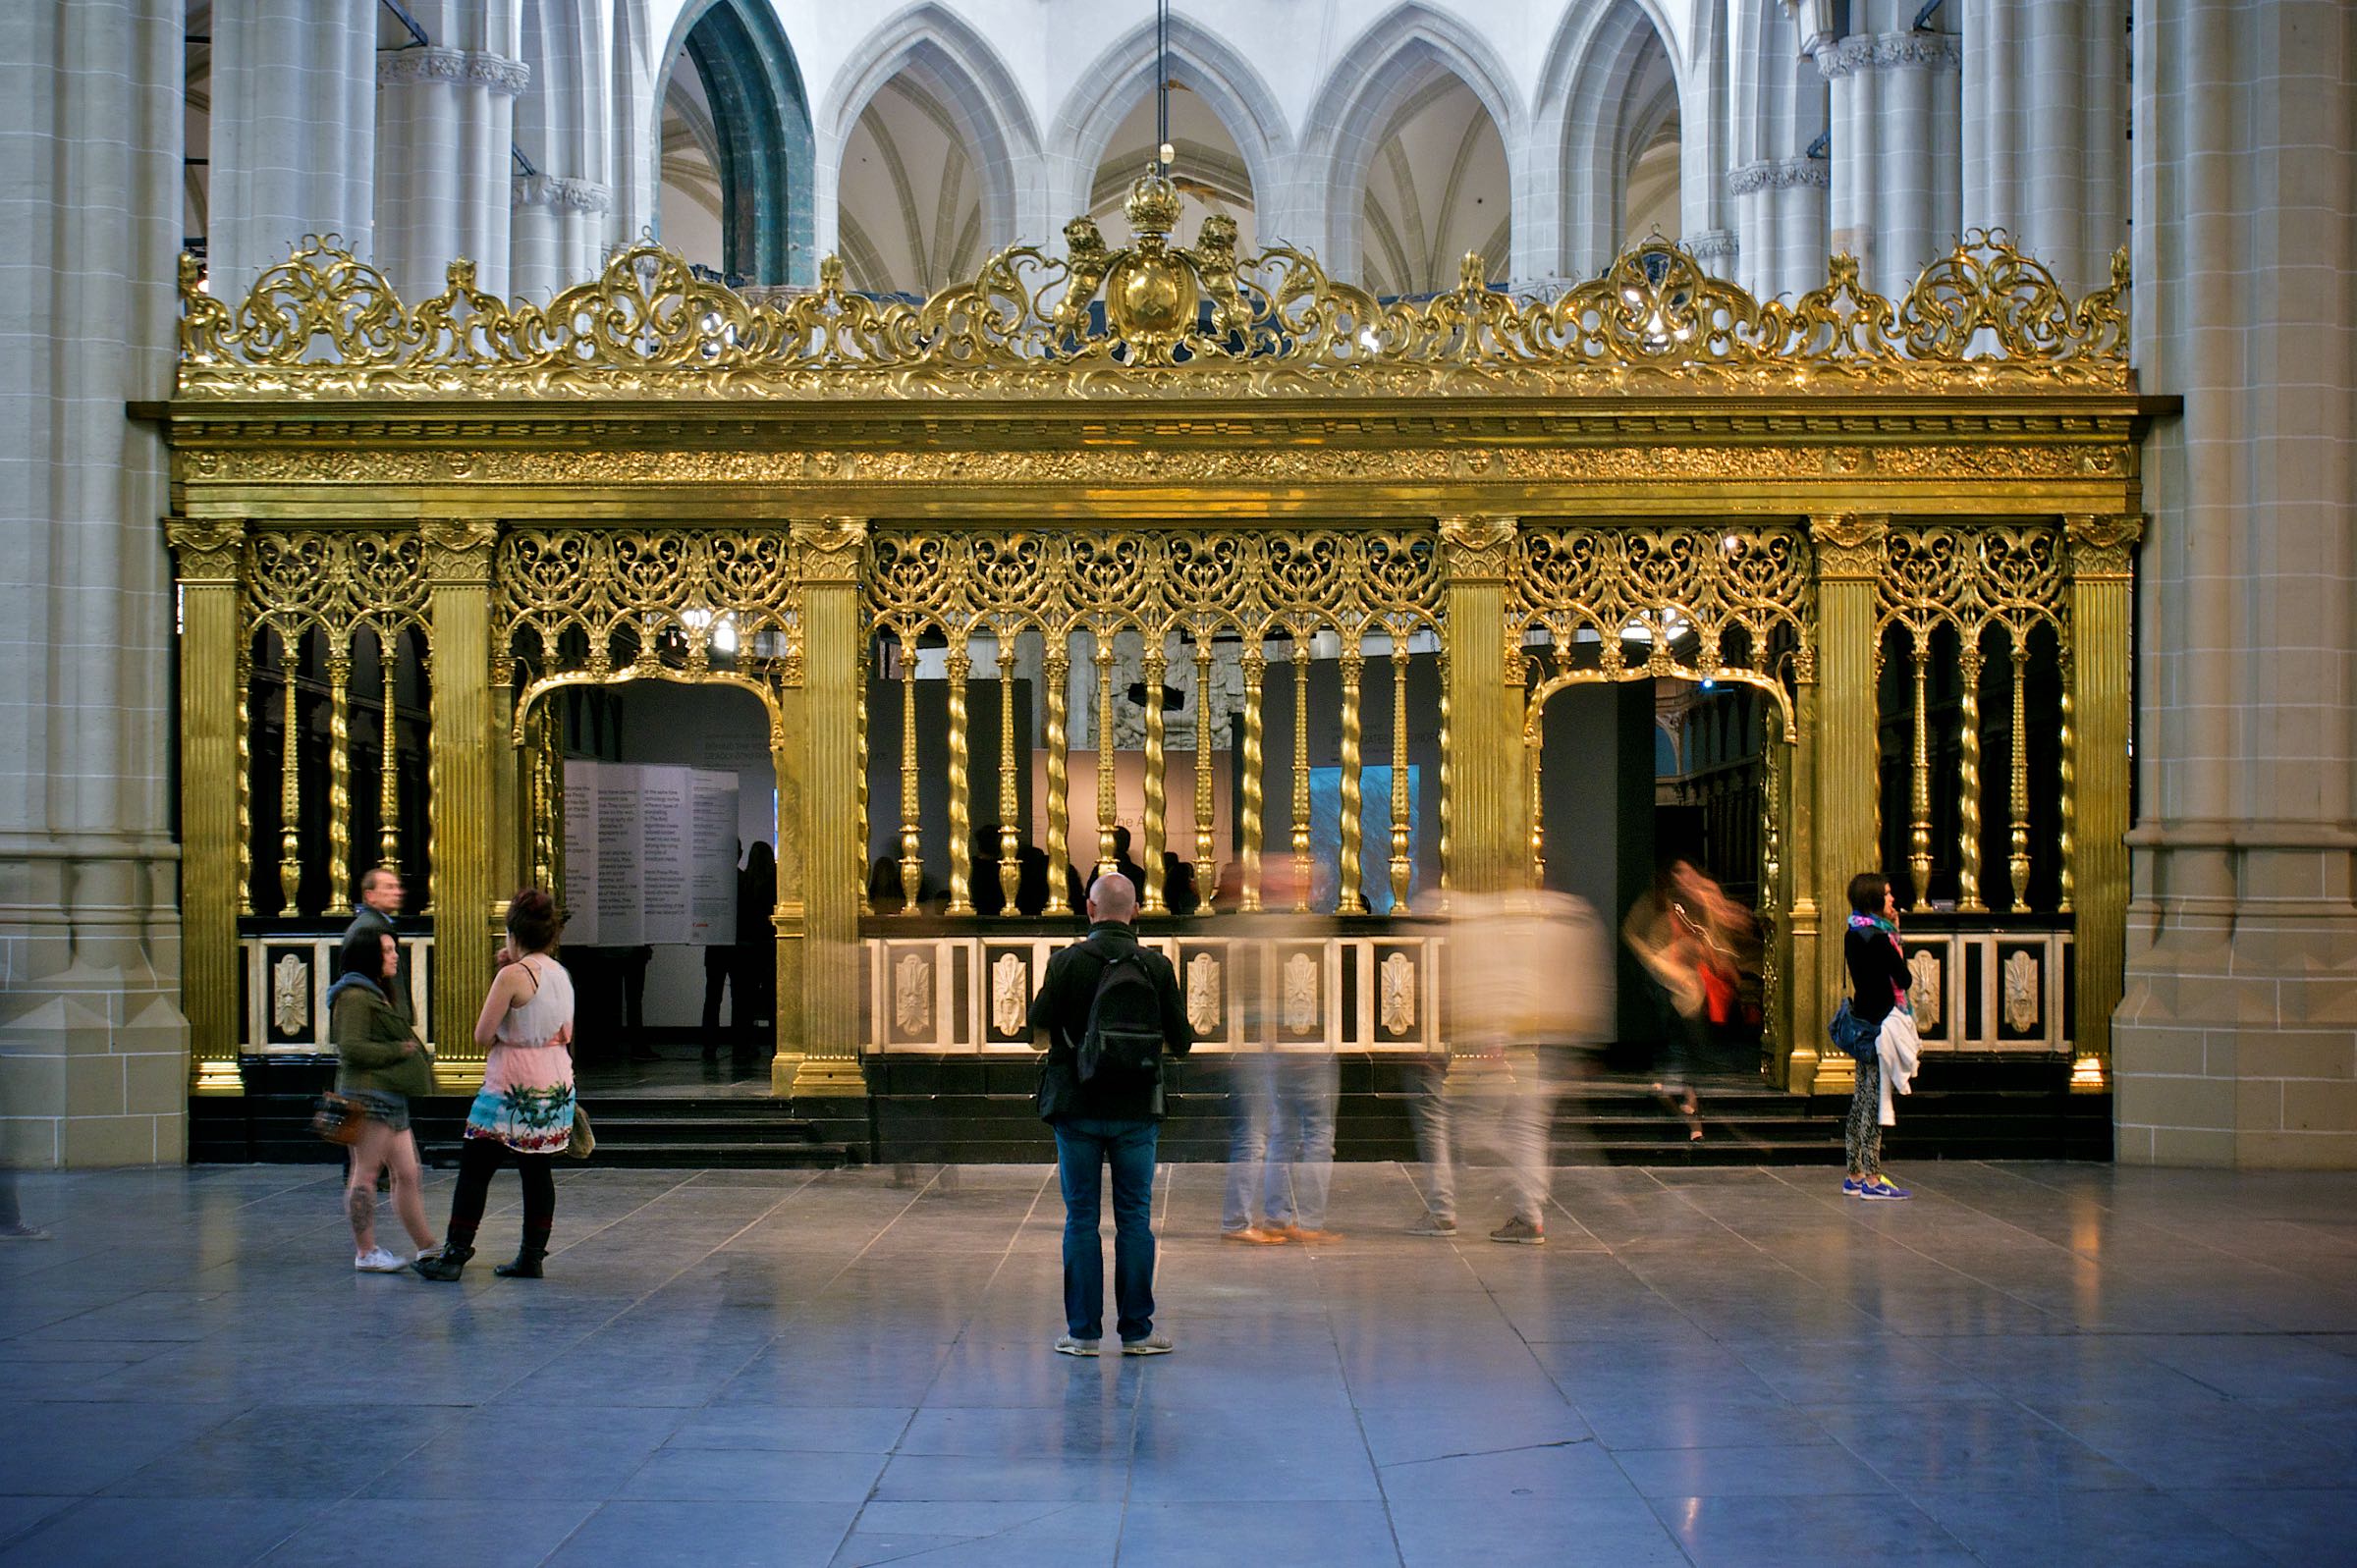 Exhibition in a Church